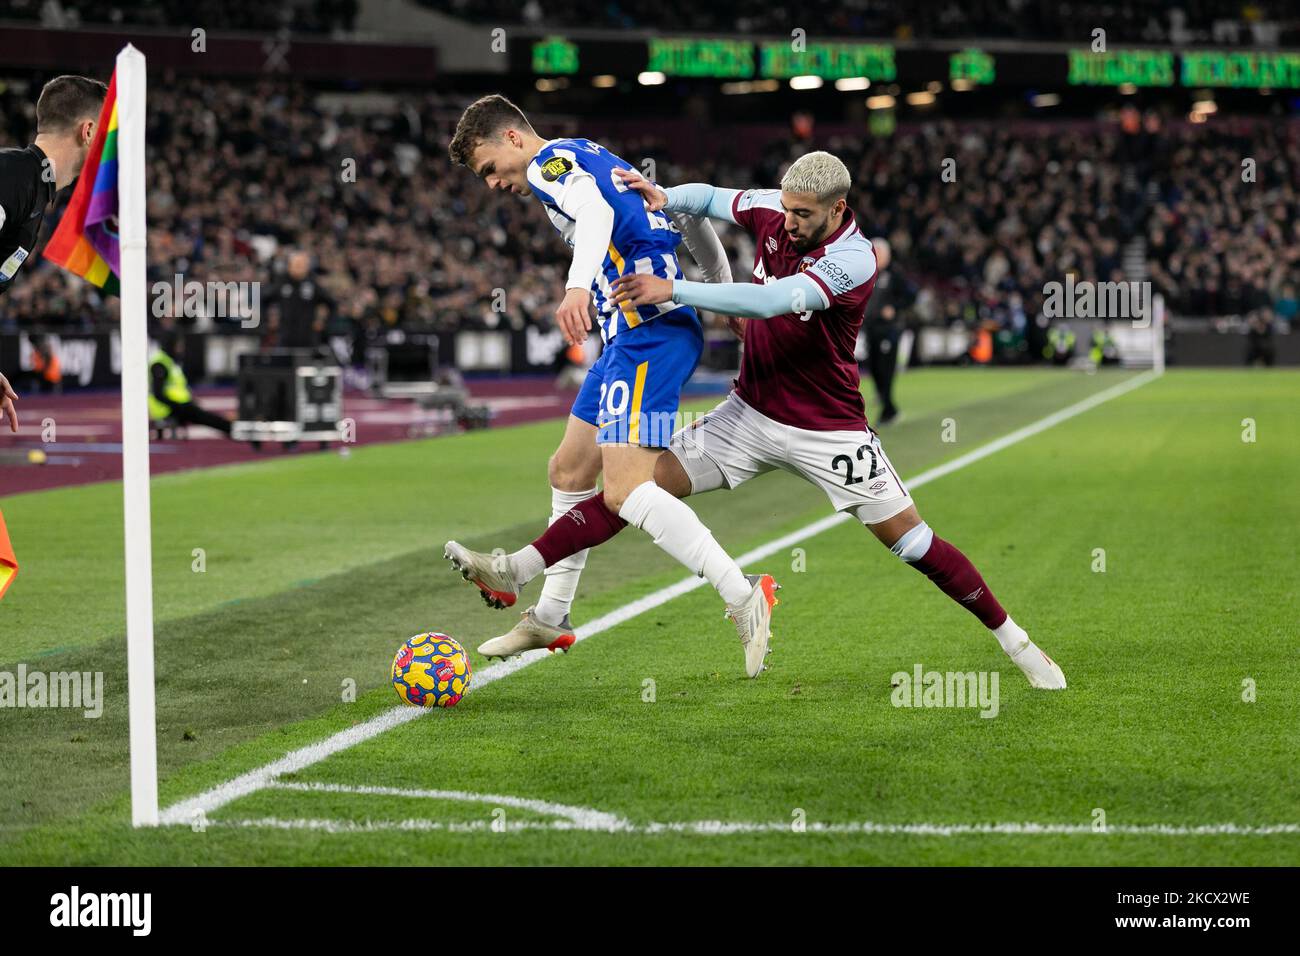 Solly March of Brighton & Hove Albion and Saïd Benrahma of West Ham United compete for the ball during the Premier League match between West Ham United and Brighton and Hove Albion at the London Stadium, Stratford on Wednesday 1st December 2021. (Photo by Juan Gasperini/MI News/NurPhoto) Stock Photo